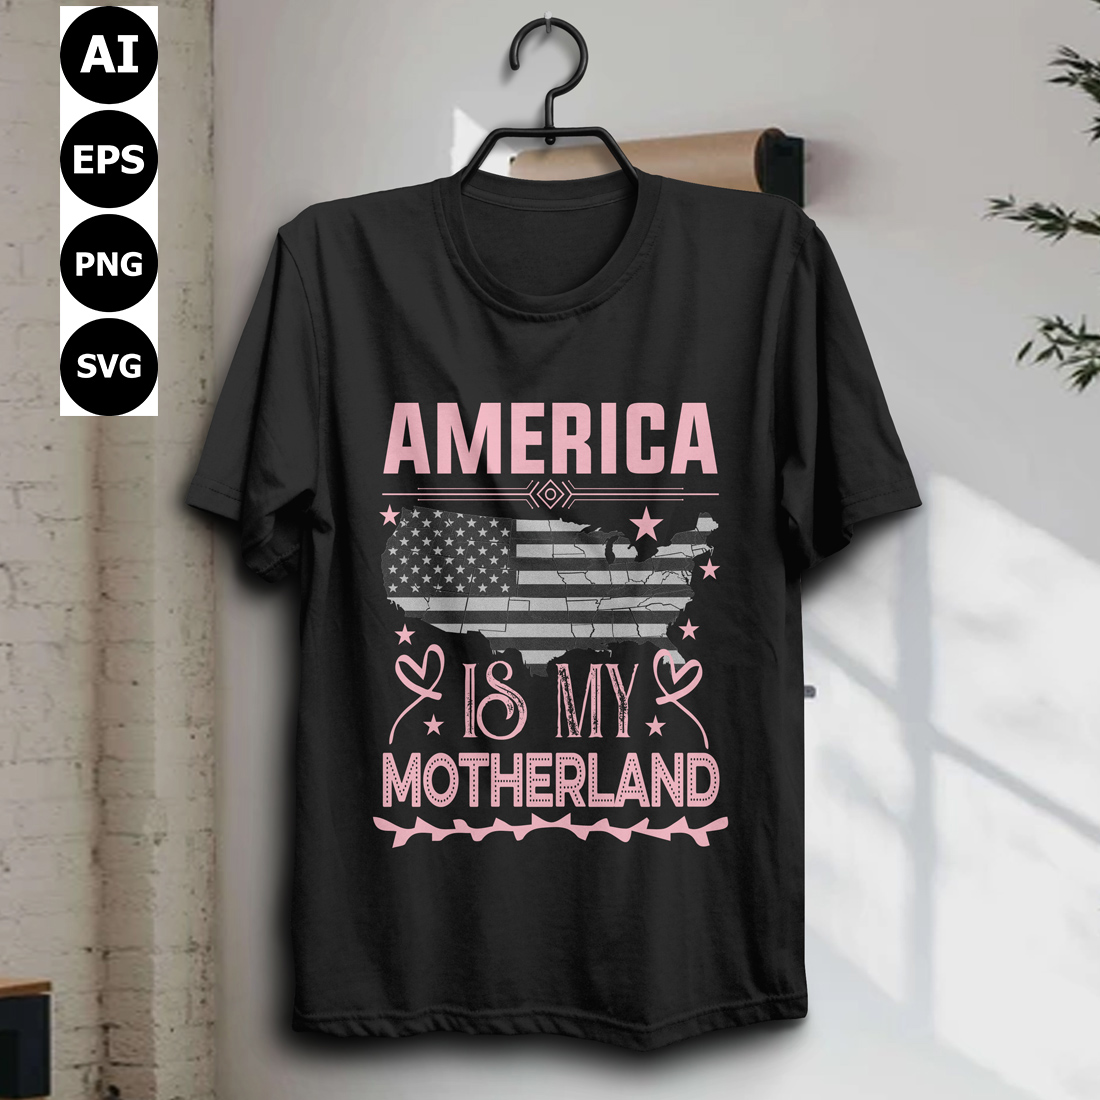 America is my motherland preview image.